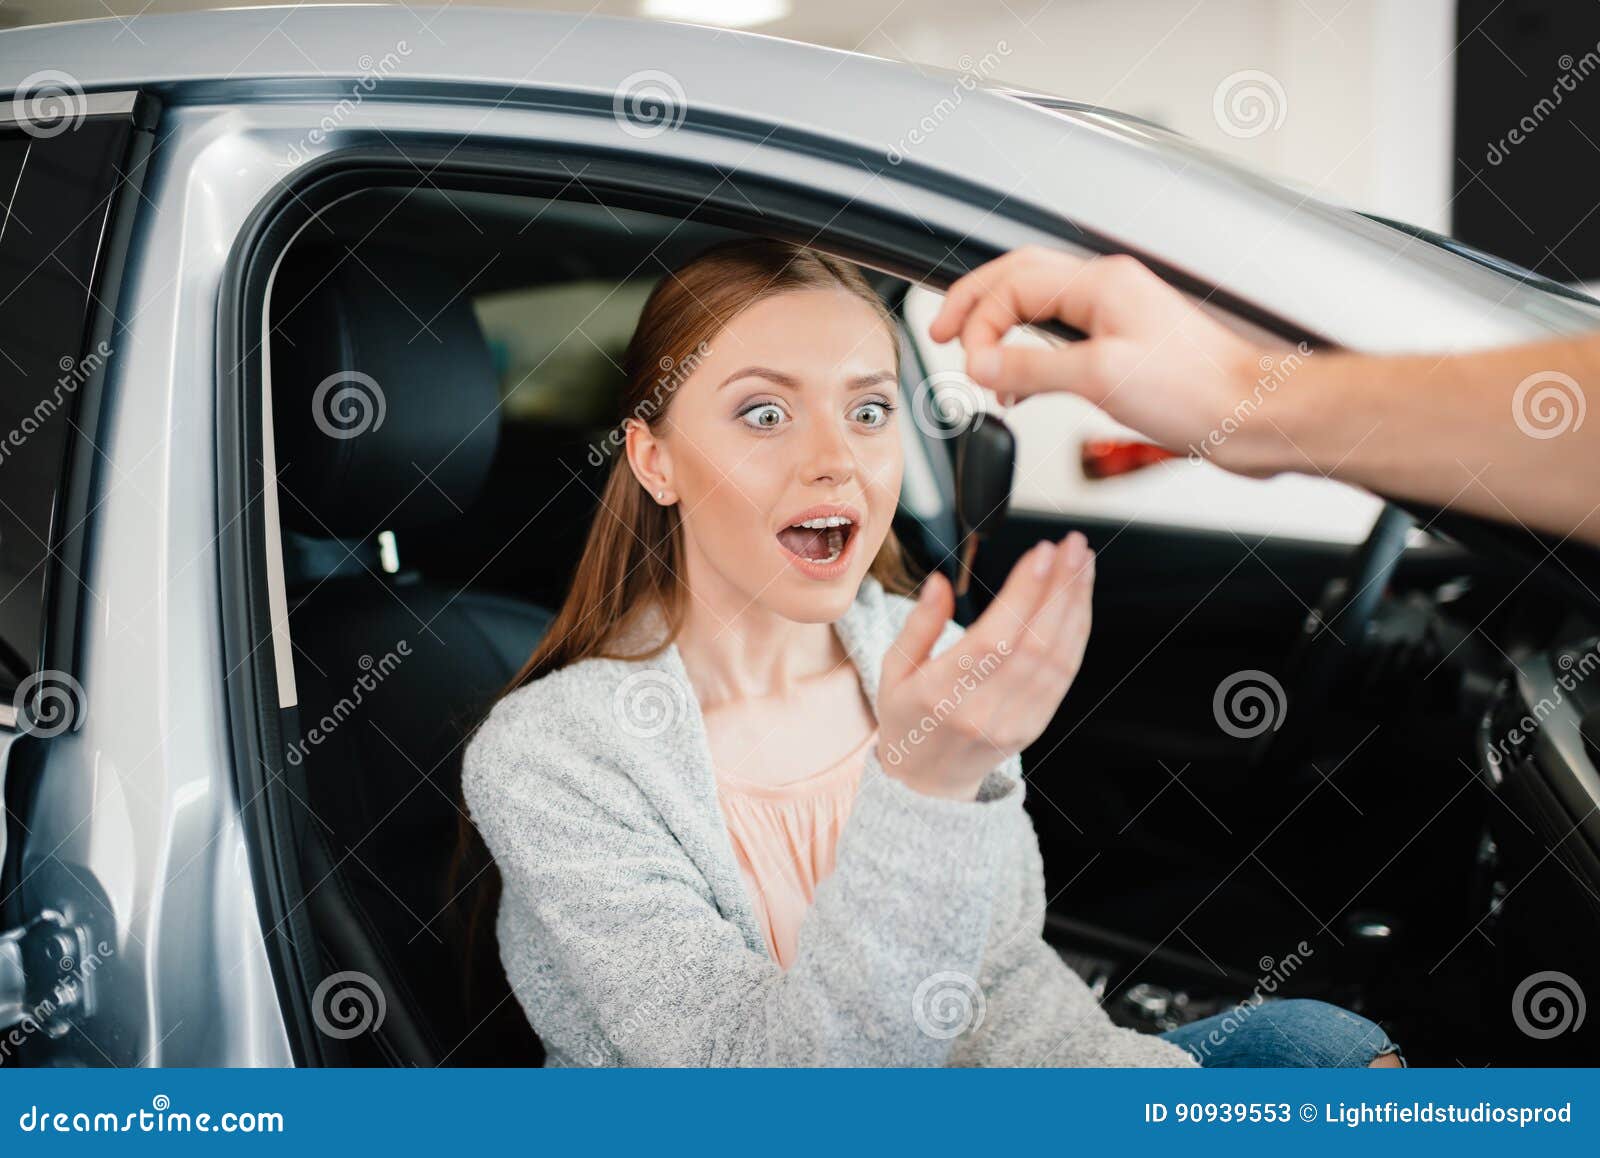 Person Giving Car Key To Excited Woman Sitting in Car Stock Image ...